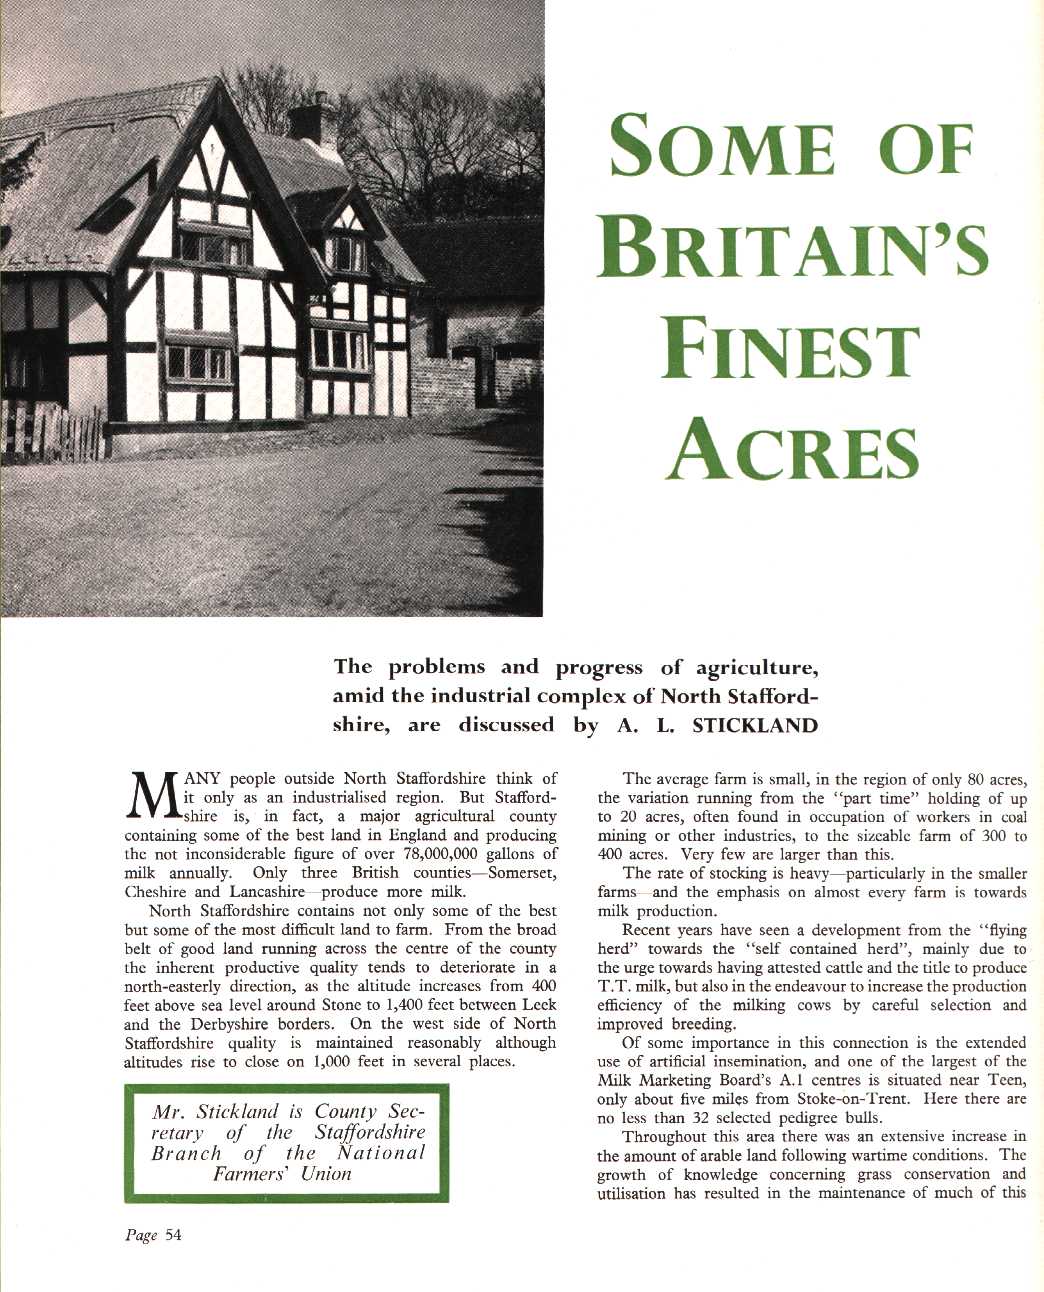 Some of Britain's finest acres" The problems and progress of agriculture, amid the industrial complex of North Staffordshire